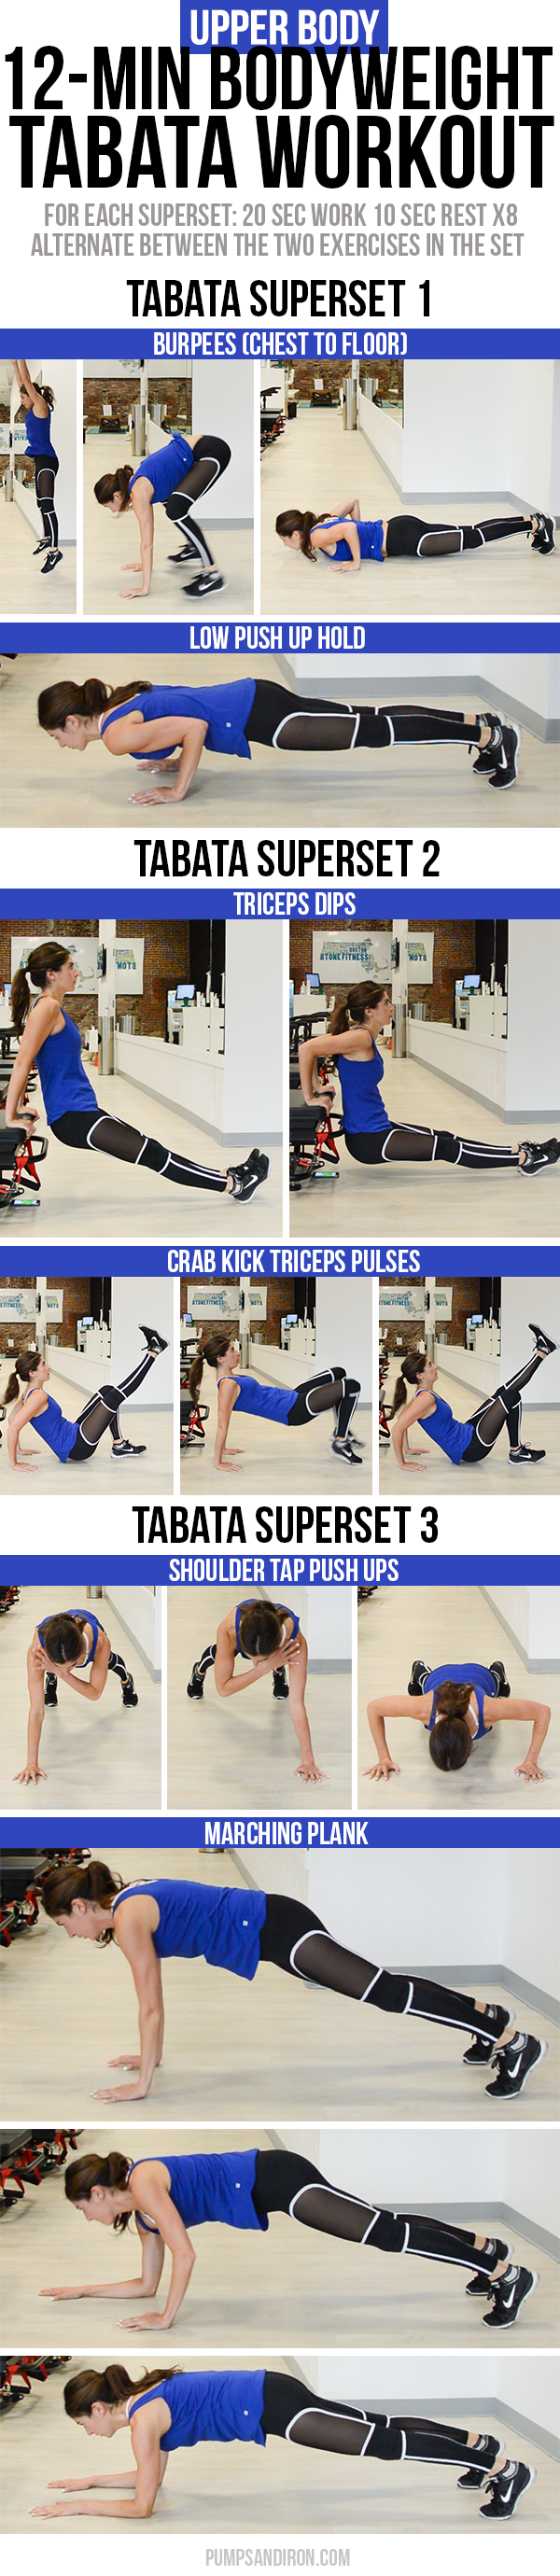 12-Minute Tabata Workout: 3 tabata supersets focusing on upper body - no equipment needed!